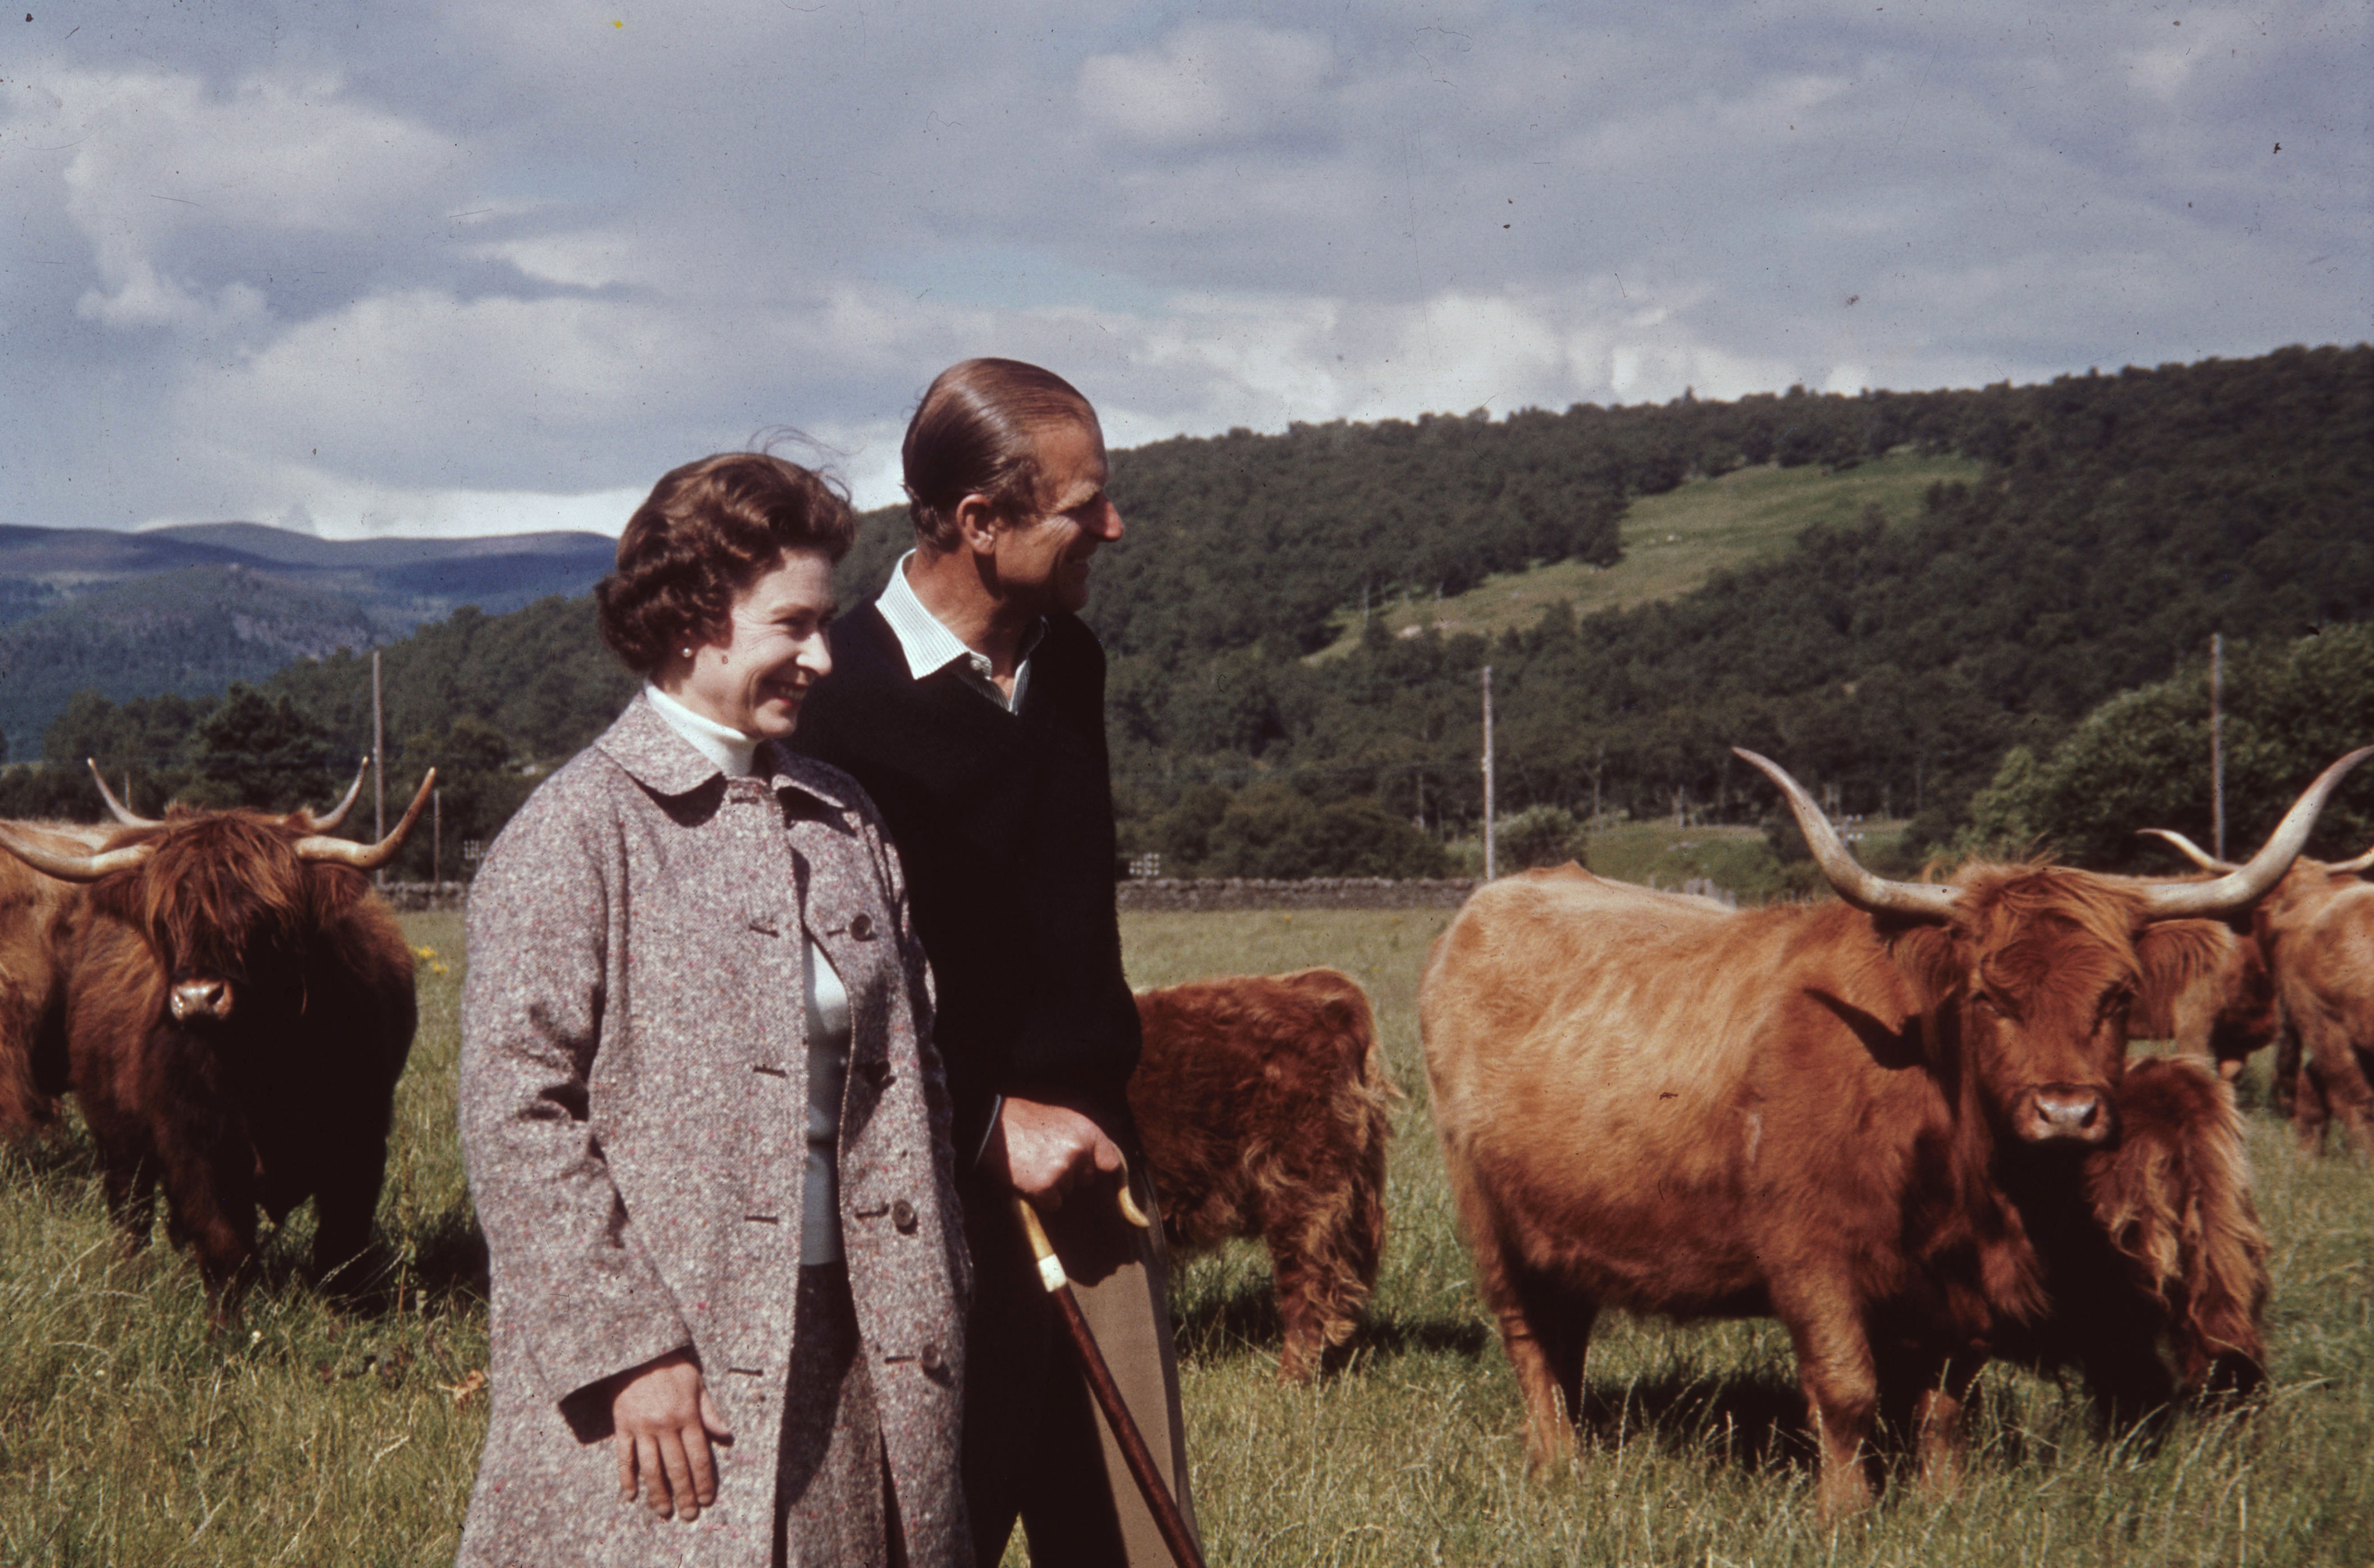 <p>Queen Elizabeth II and Prince Philip love the outdoors. They got up close and personal with some Highland cattle on her Balmoral Estate in Scotland in 1972.</p>